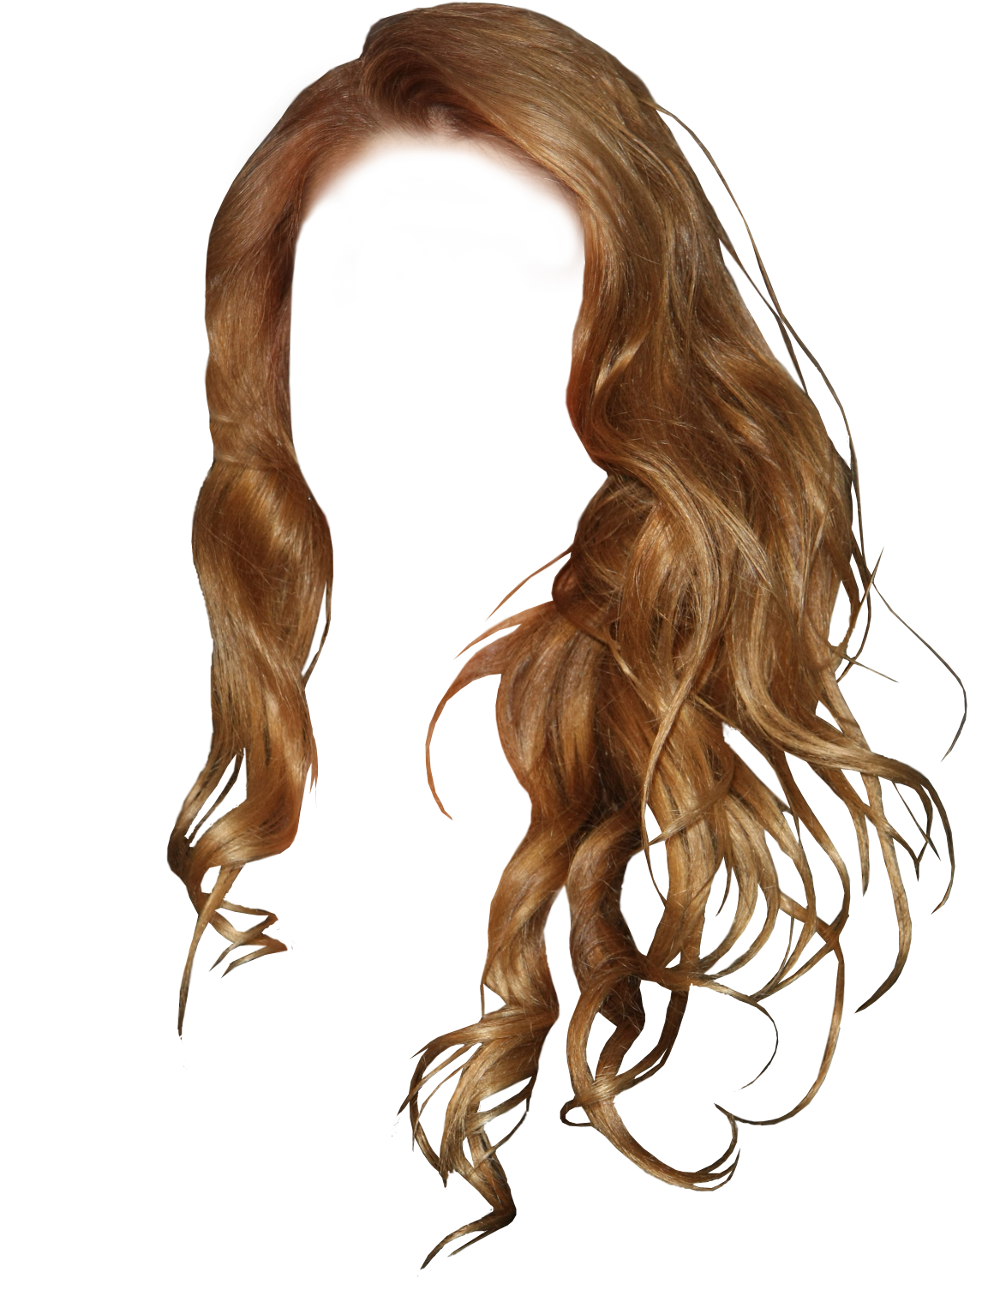 Hairstyles PNG Transparent Images - PNG All